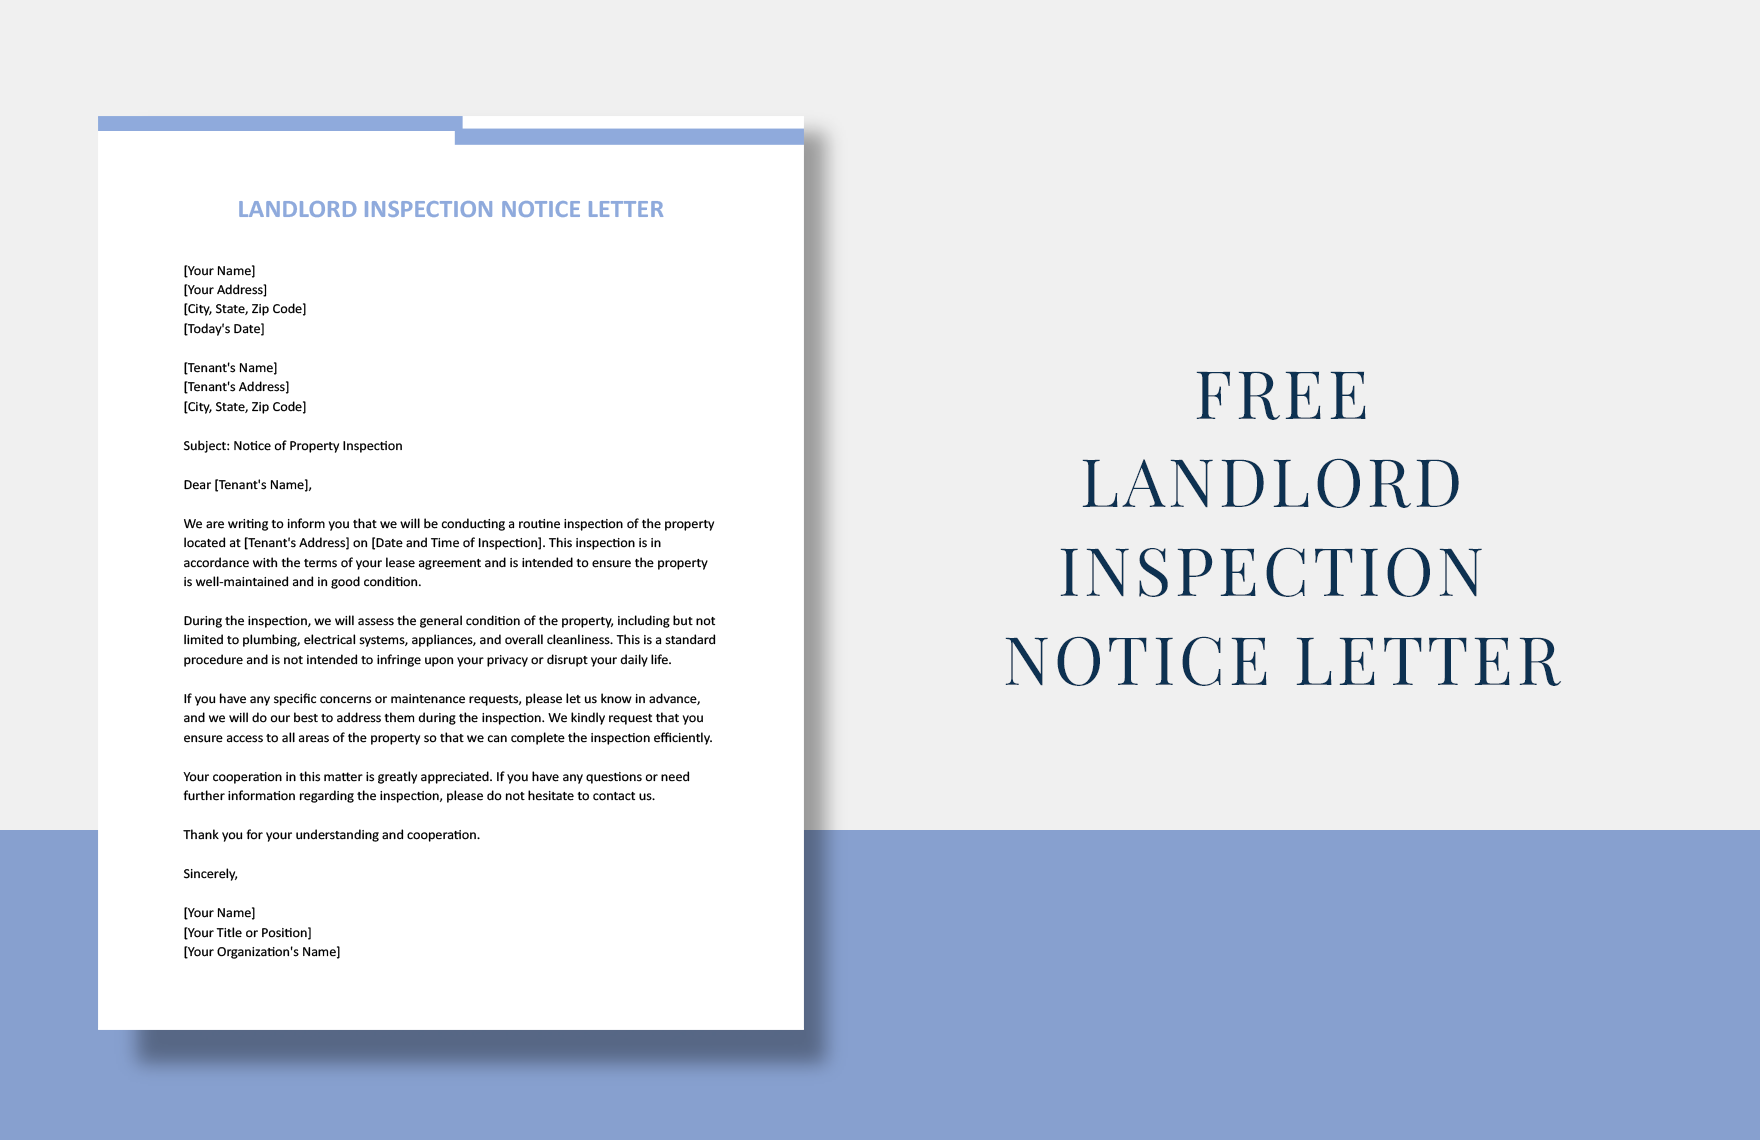 Landlord Inspection Notice Letter